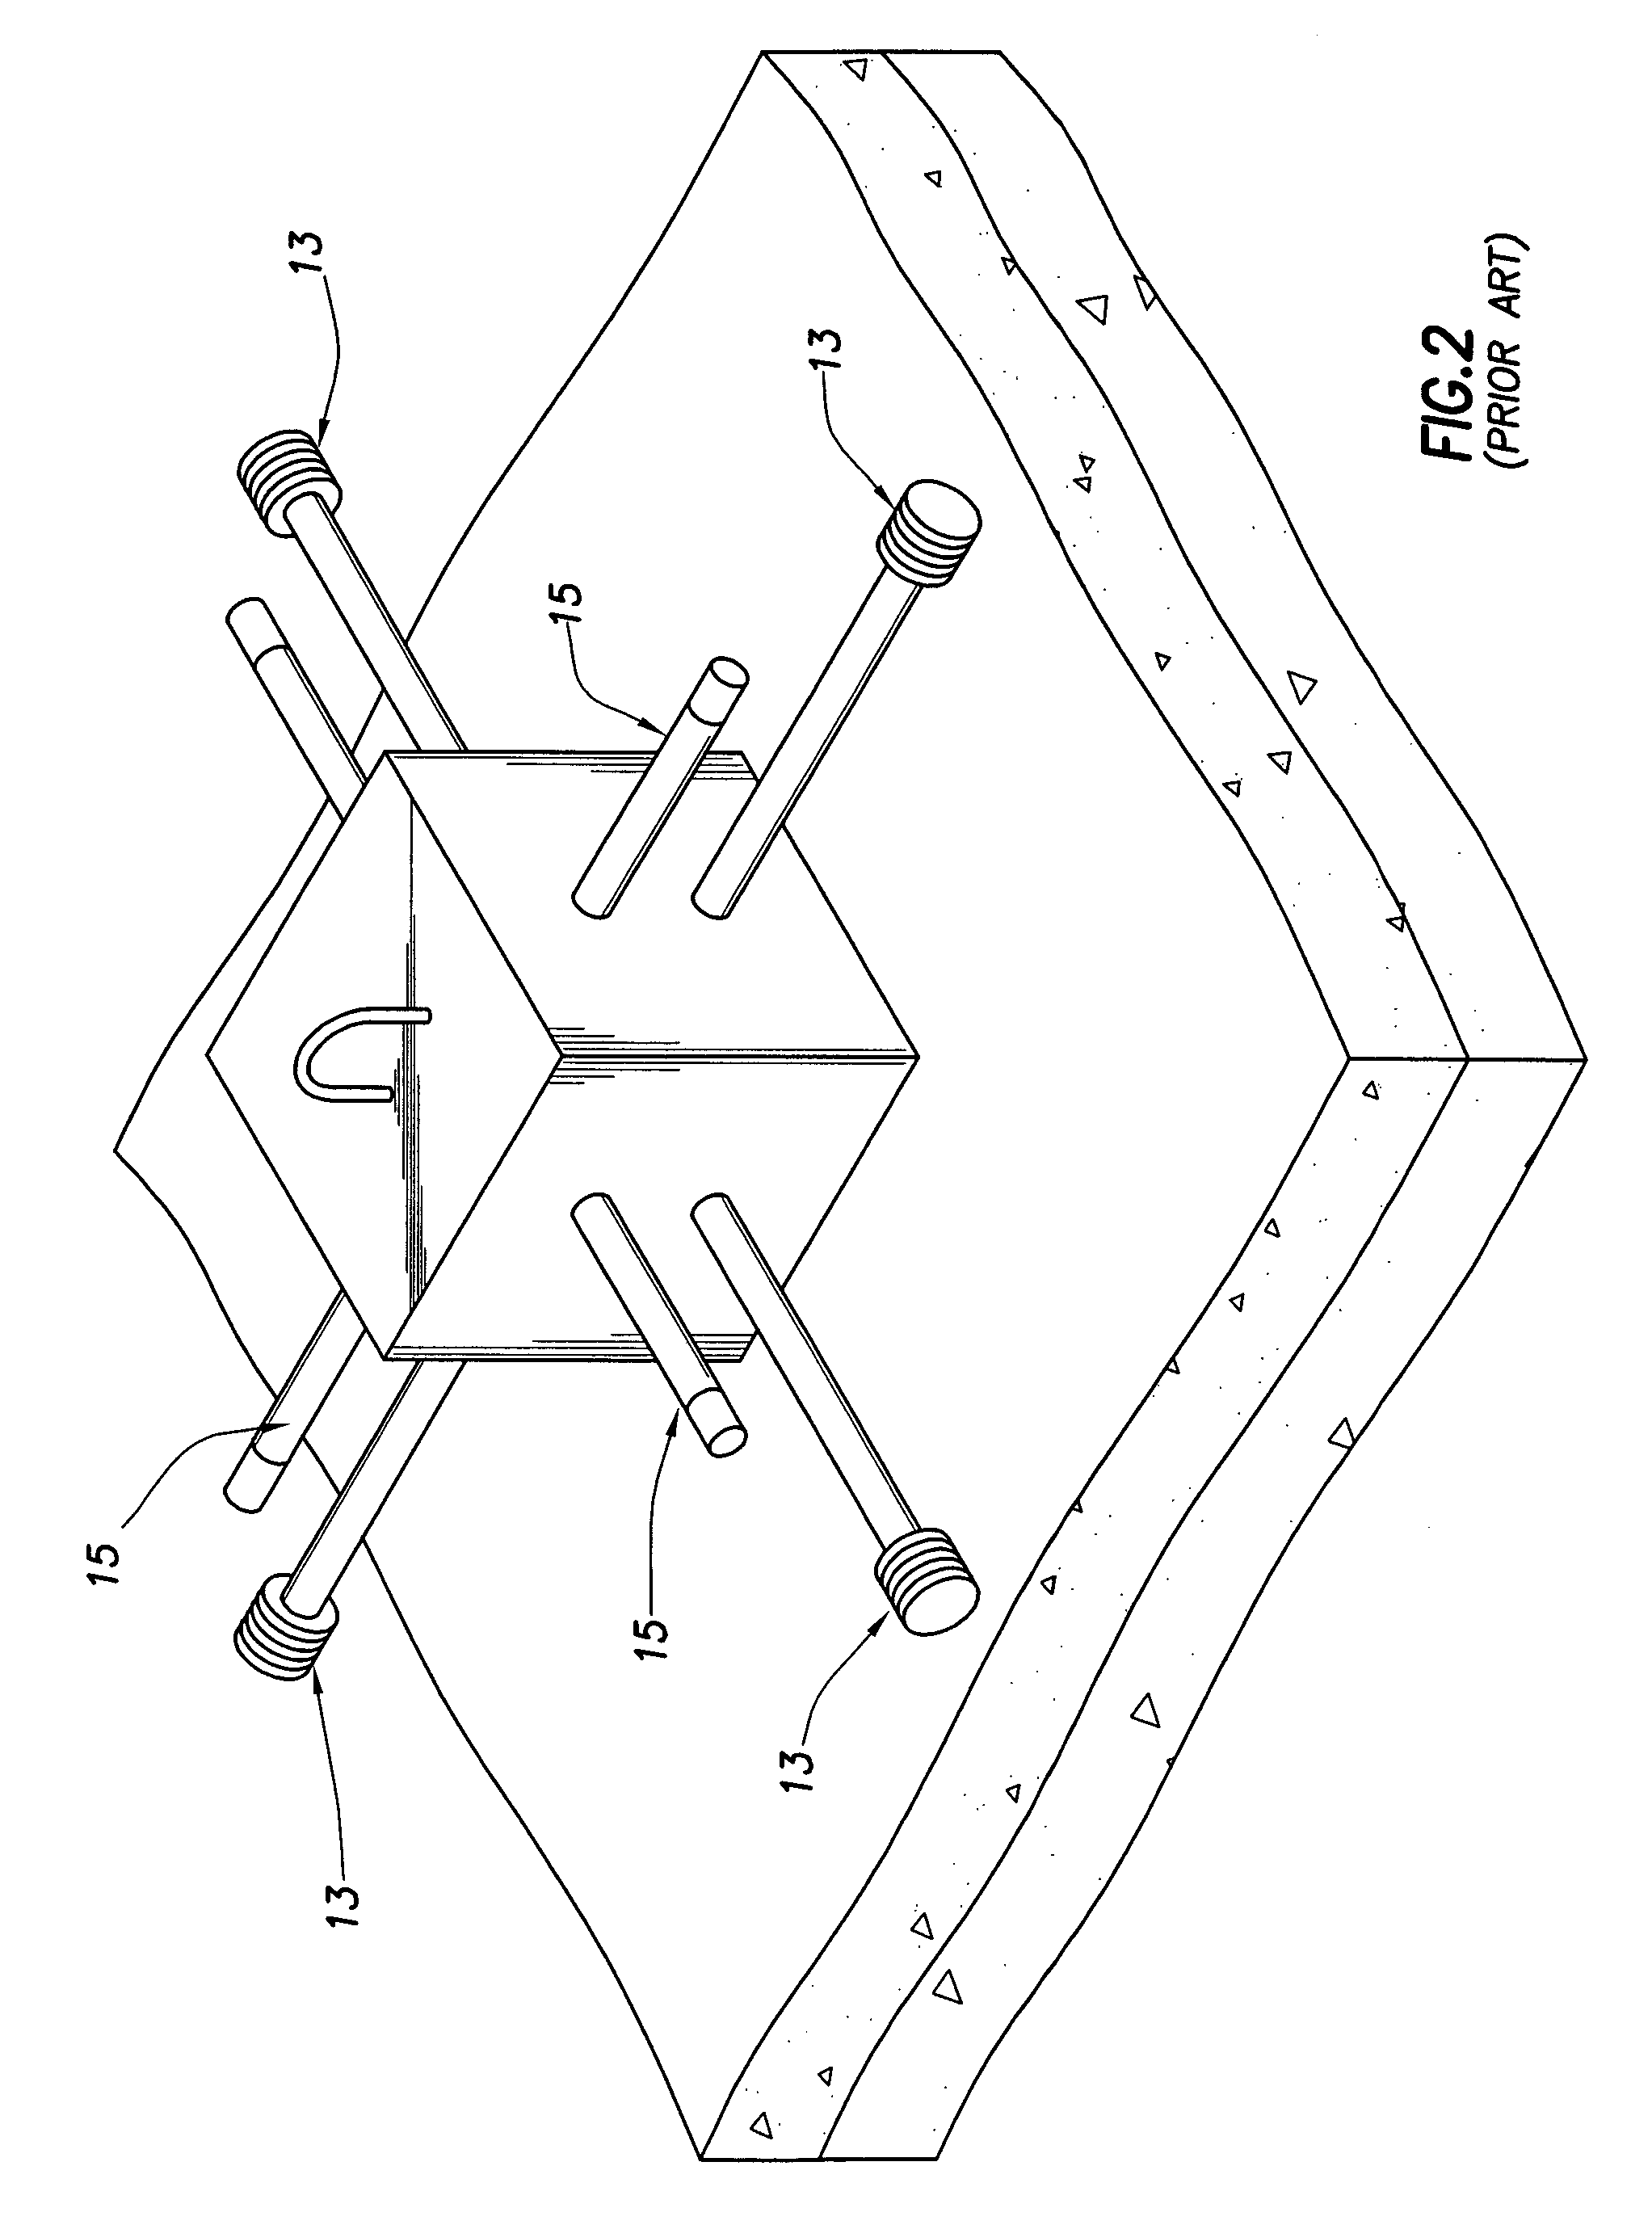 Subsurface conductivity imaging systems and methods